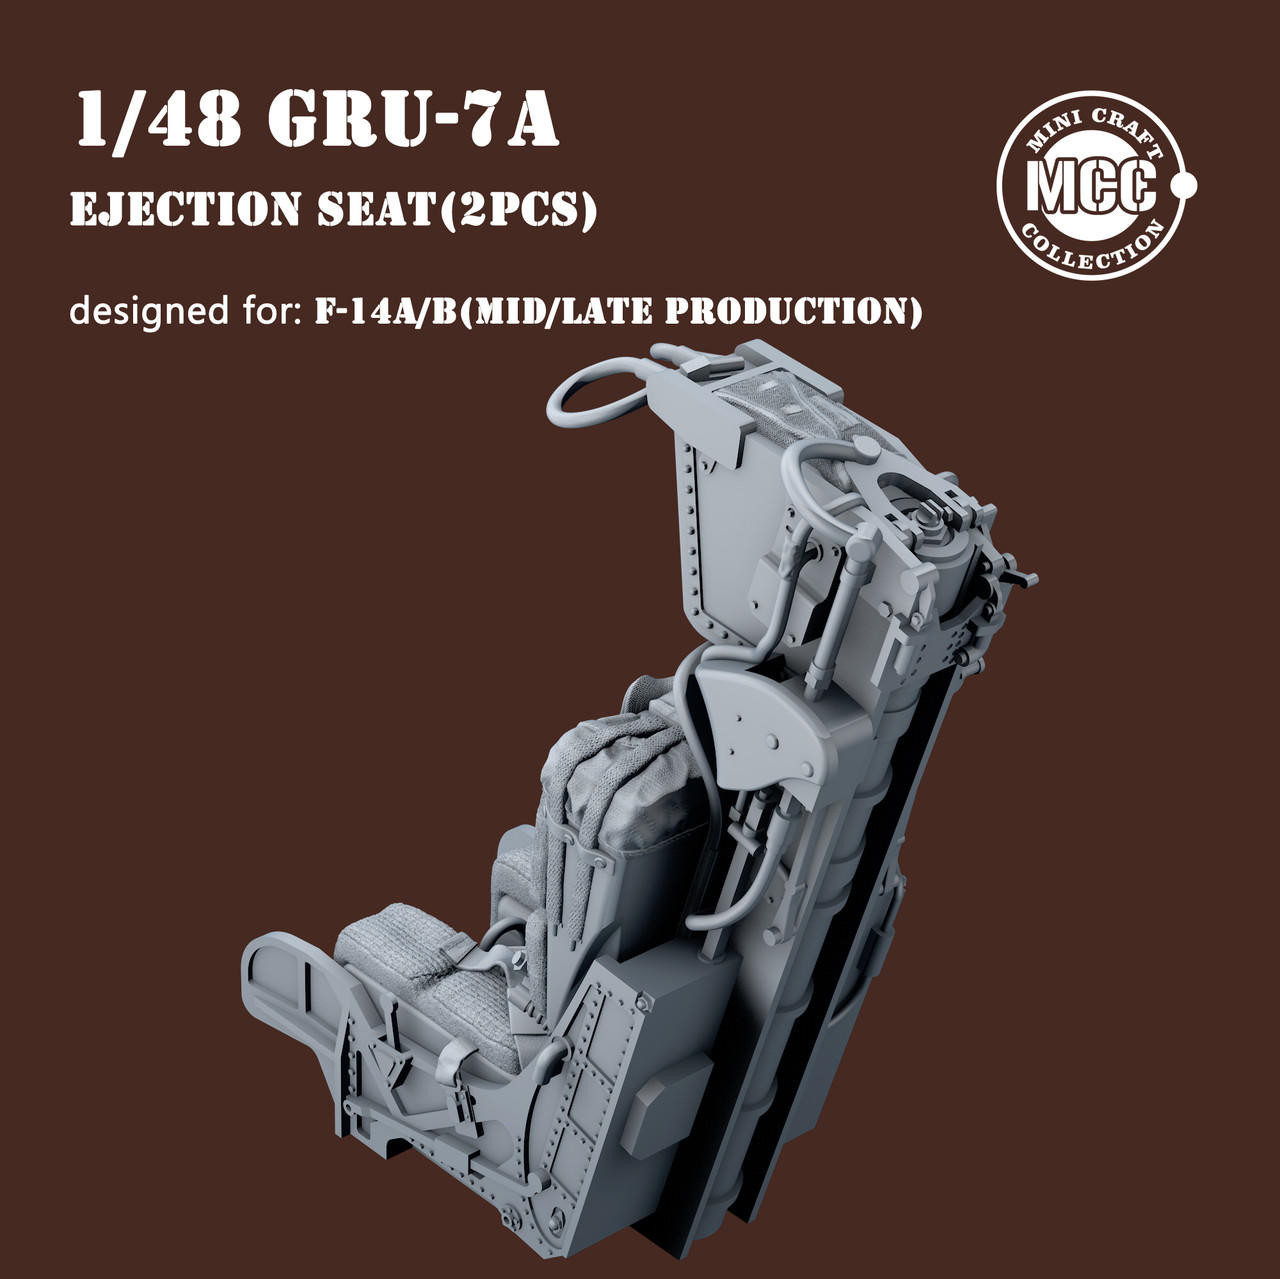 1/48 Mini Craft Collection GRU-7A Ejection Seats for F-14A/B Mid/Late ...